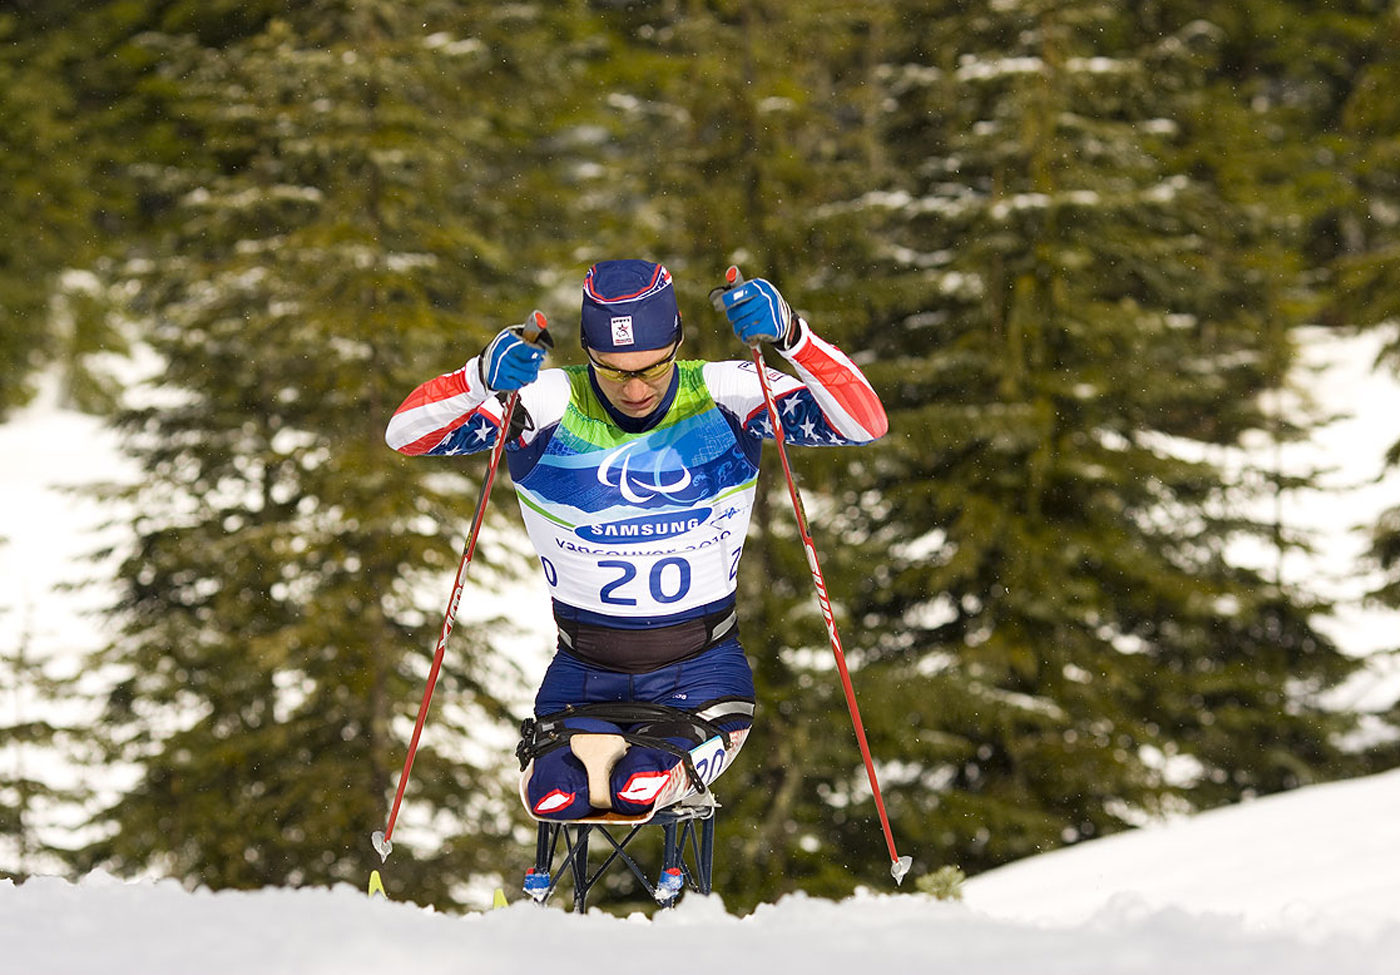 U.S. Army photo of Bronze Medalist Andy Soule at the 2010 Paralympics, the first American in history to win a medal in biathlon.